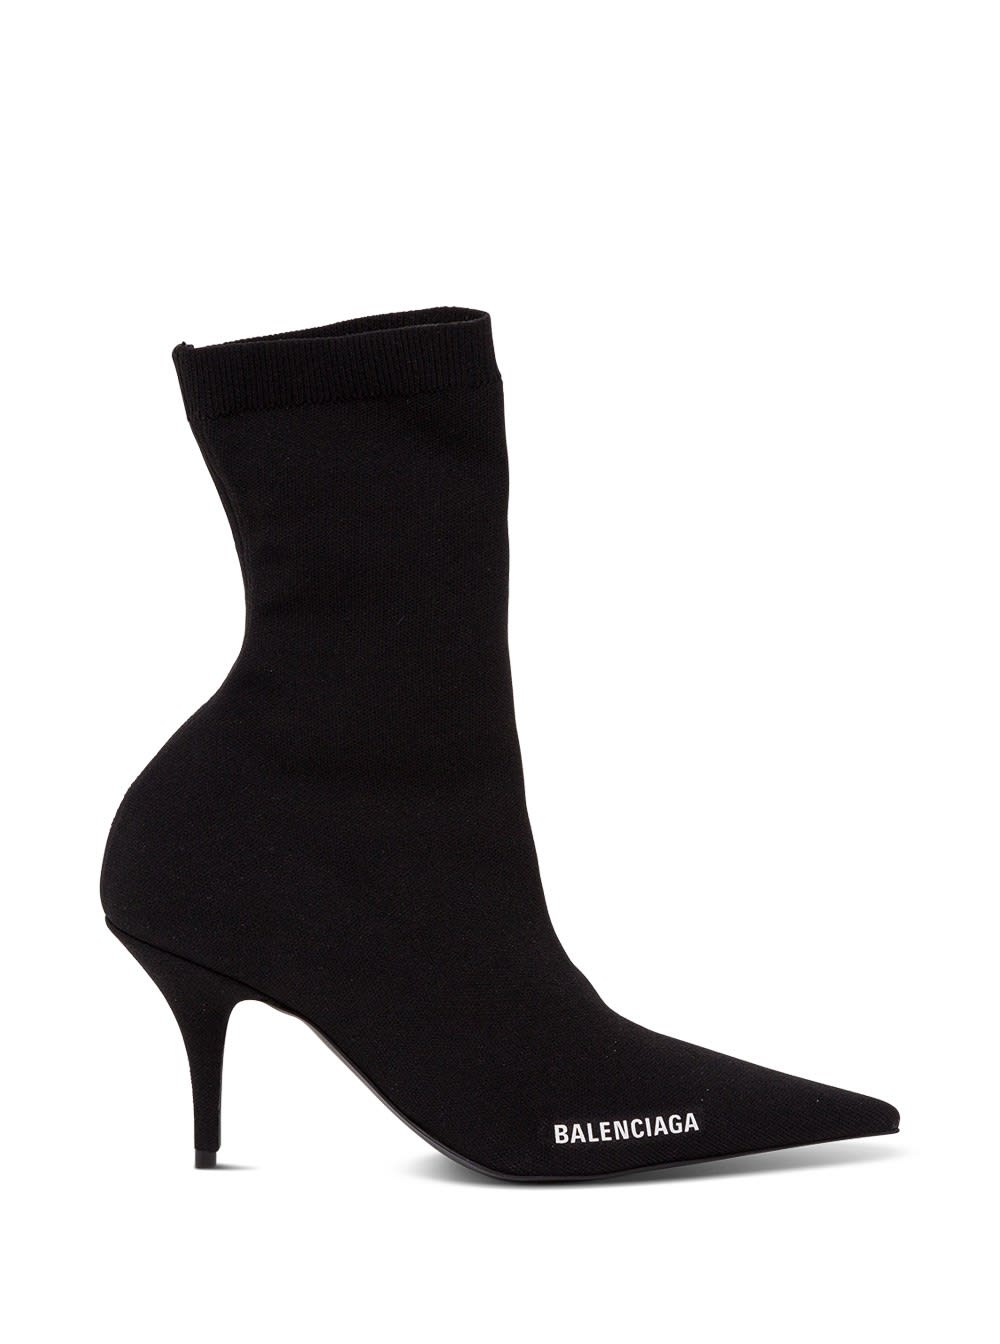 Balenciaga Knife Boots In Stretch Knit In Black